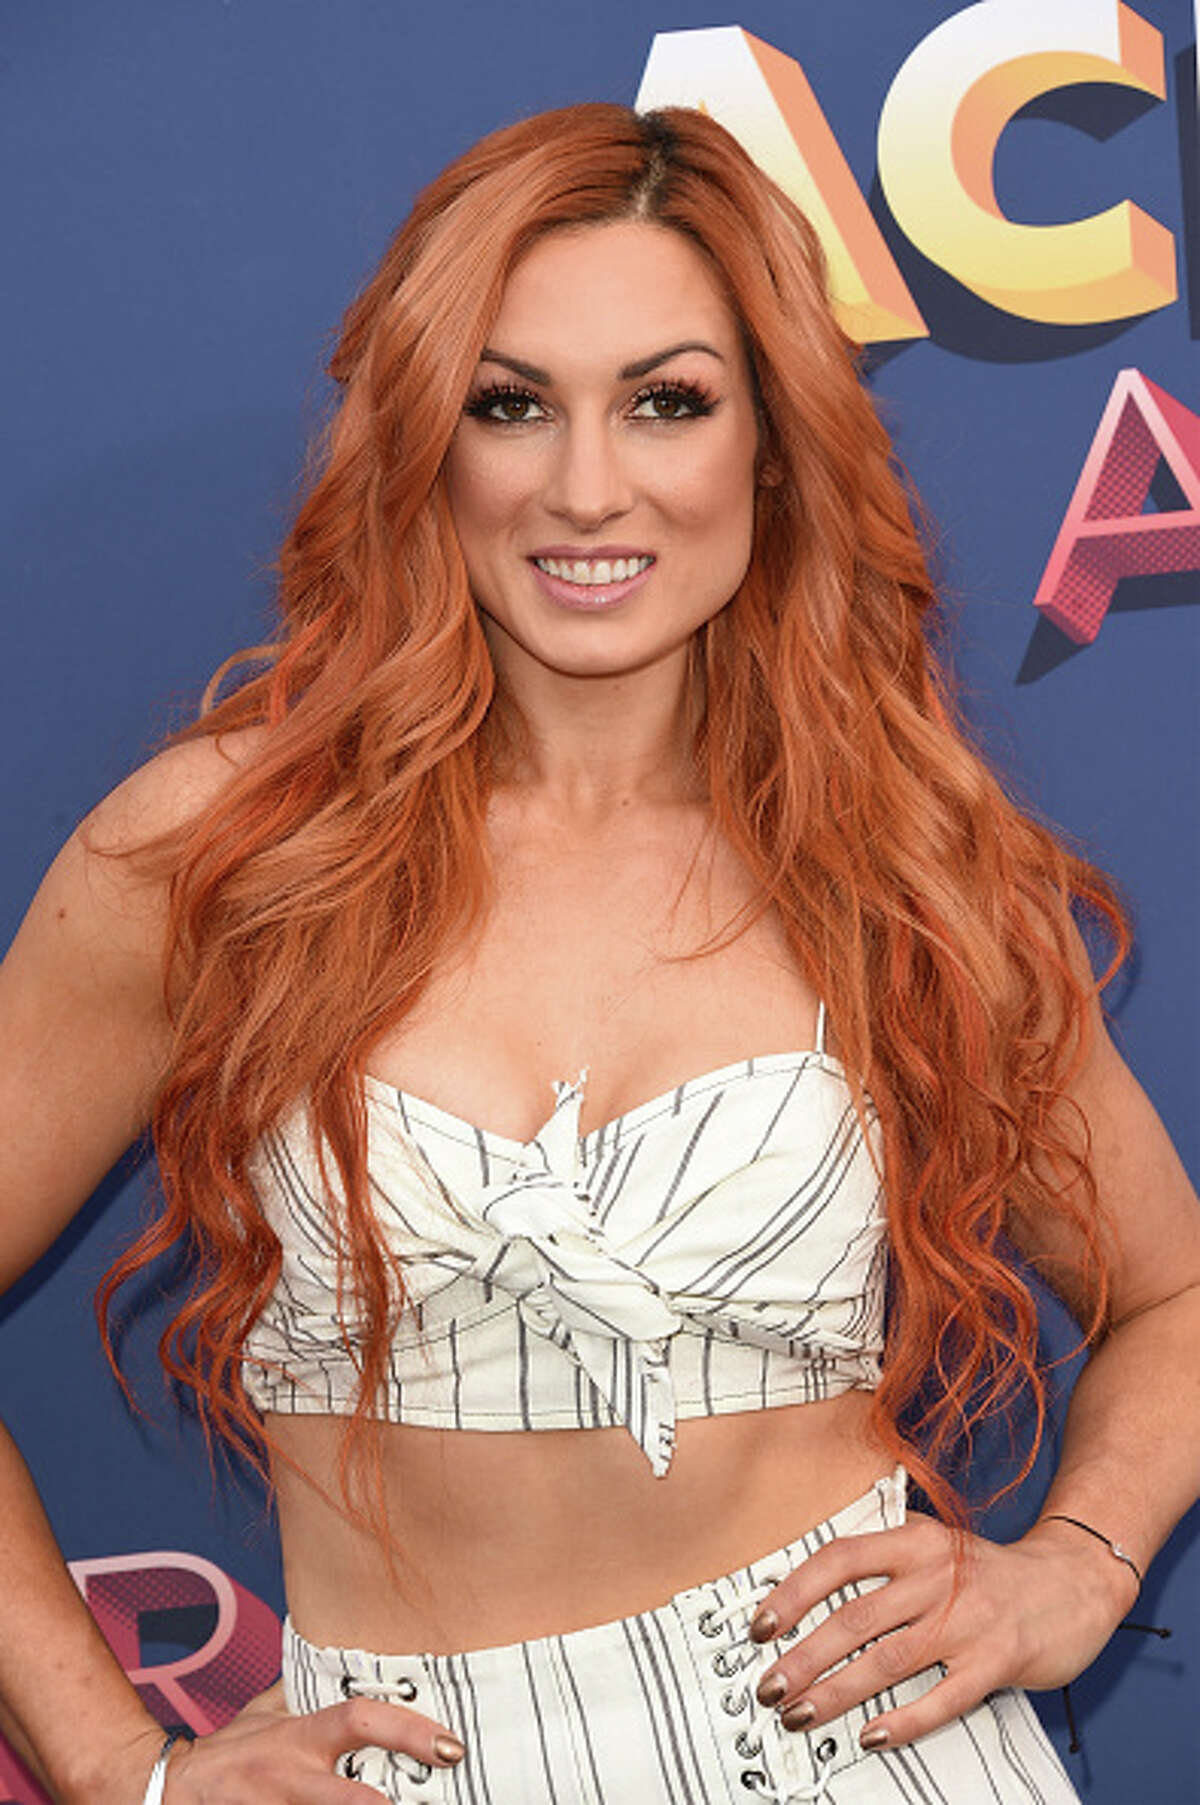 WWE's Becky Lynch to meet and greet Houston fans ahead of Elimination